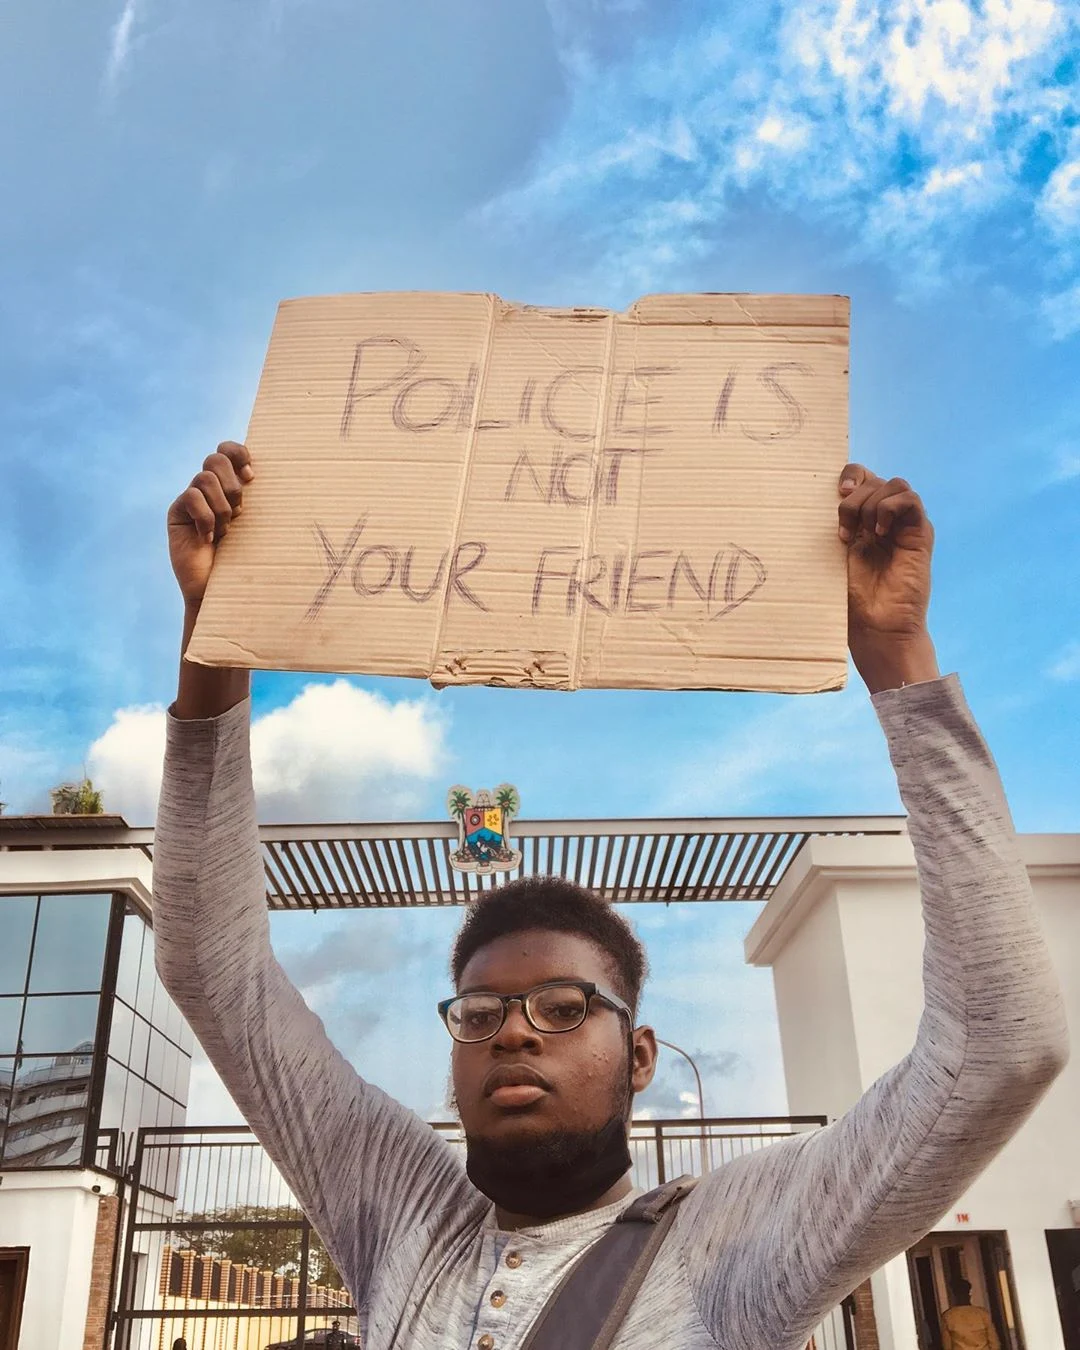 THE POLICE IS NOT YOUR FRIEND